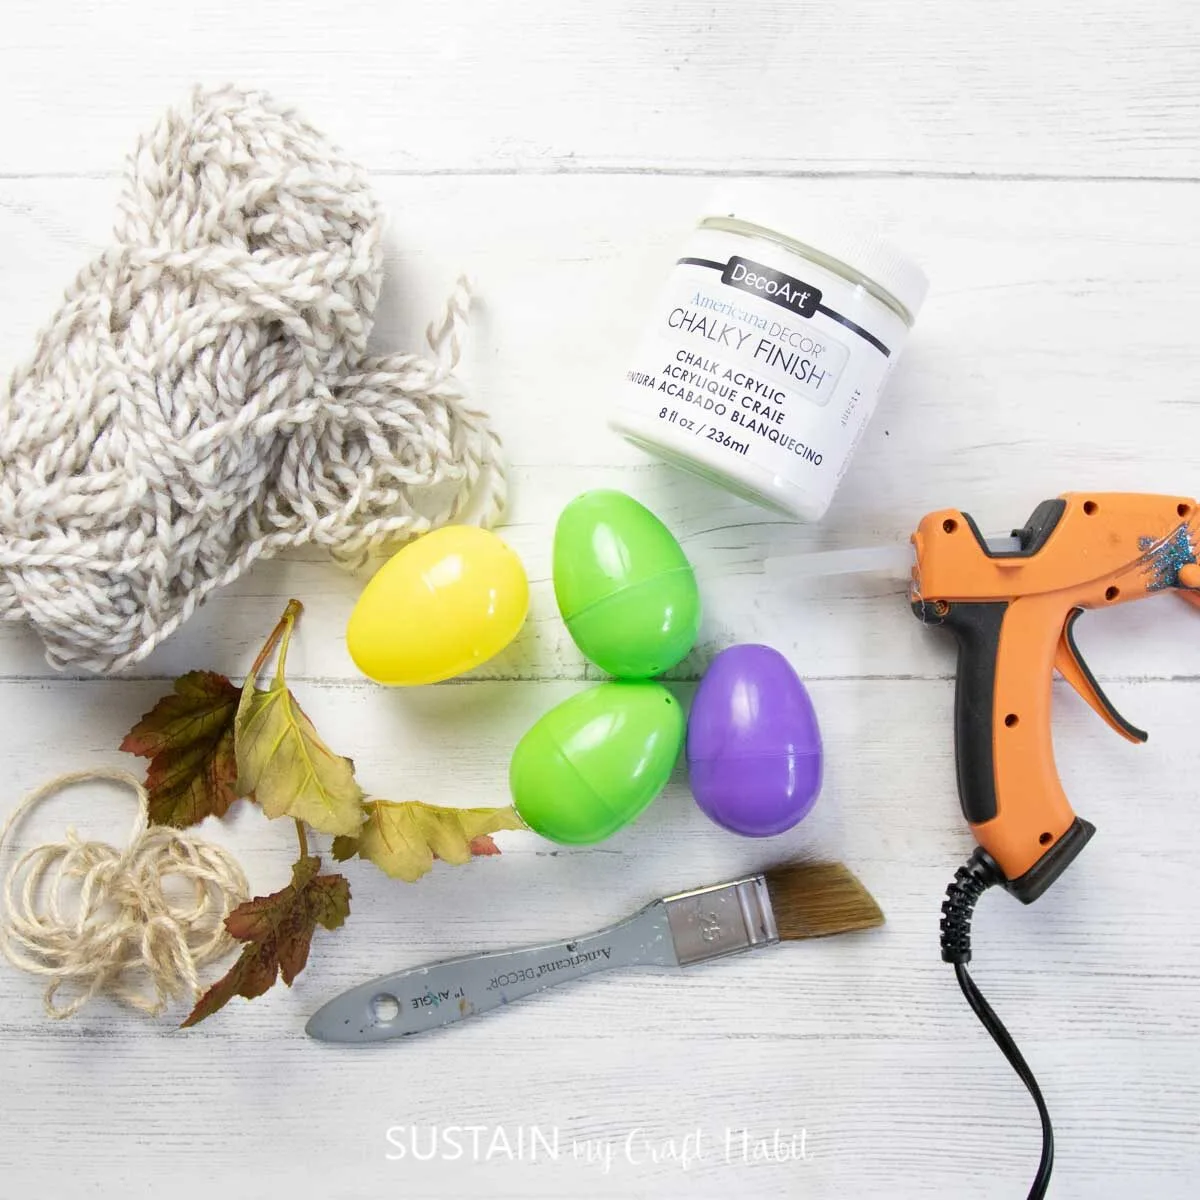 Materials needed for an upcycled plastic egg acorn ornament craft including plastic eggs, paint, hot glue, yarn, paintbrush and faux leaves.